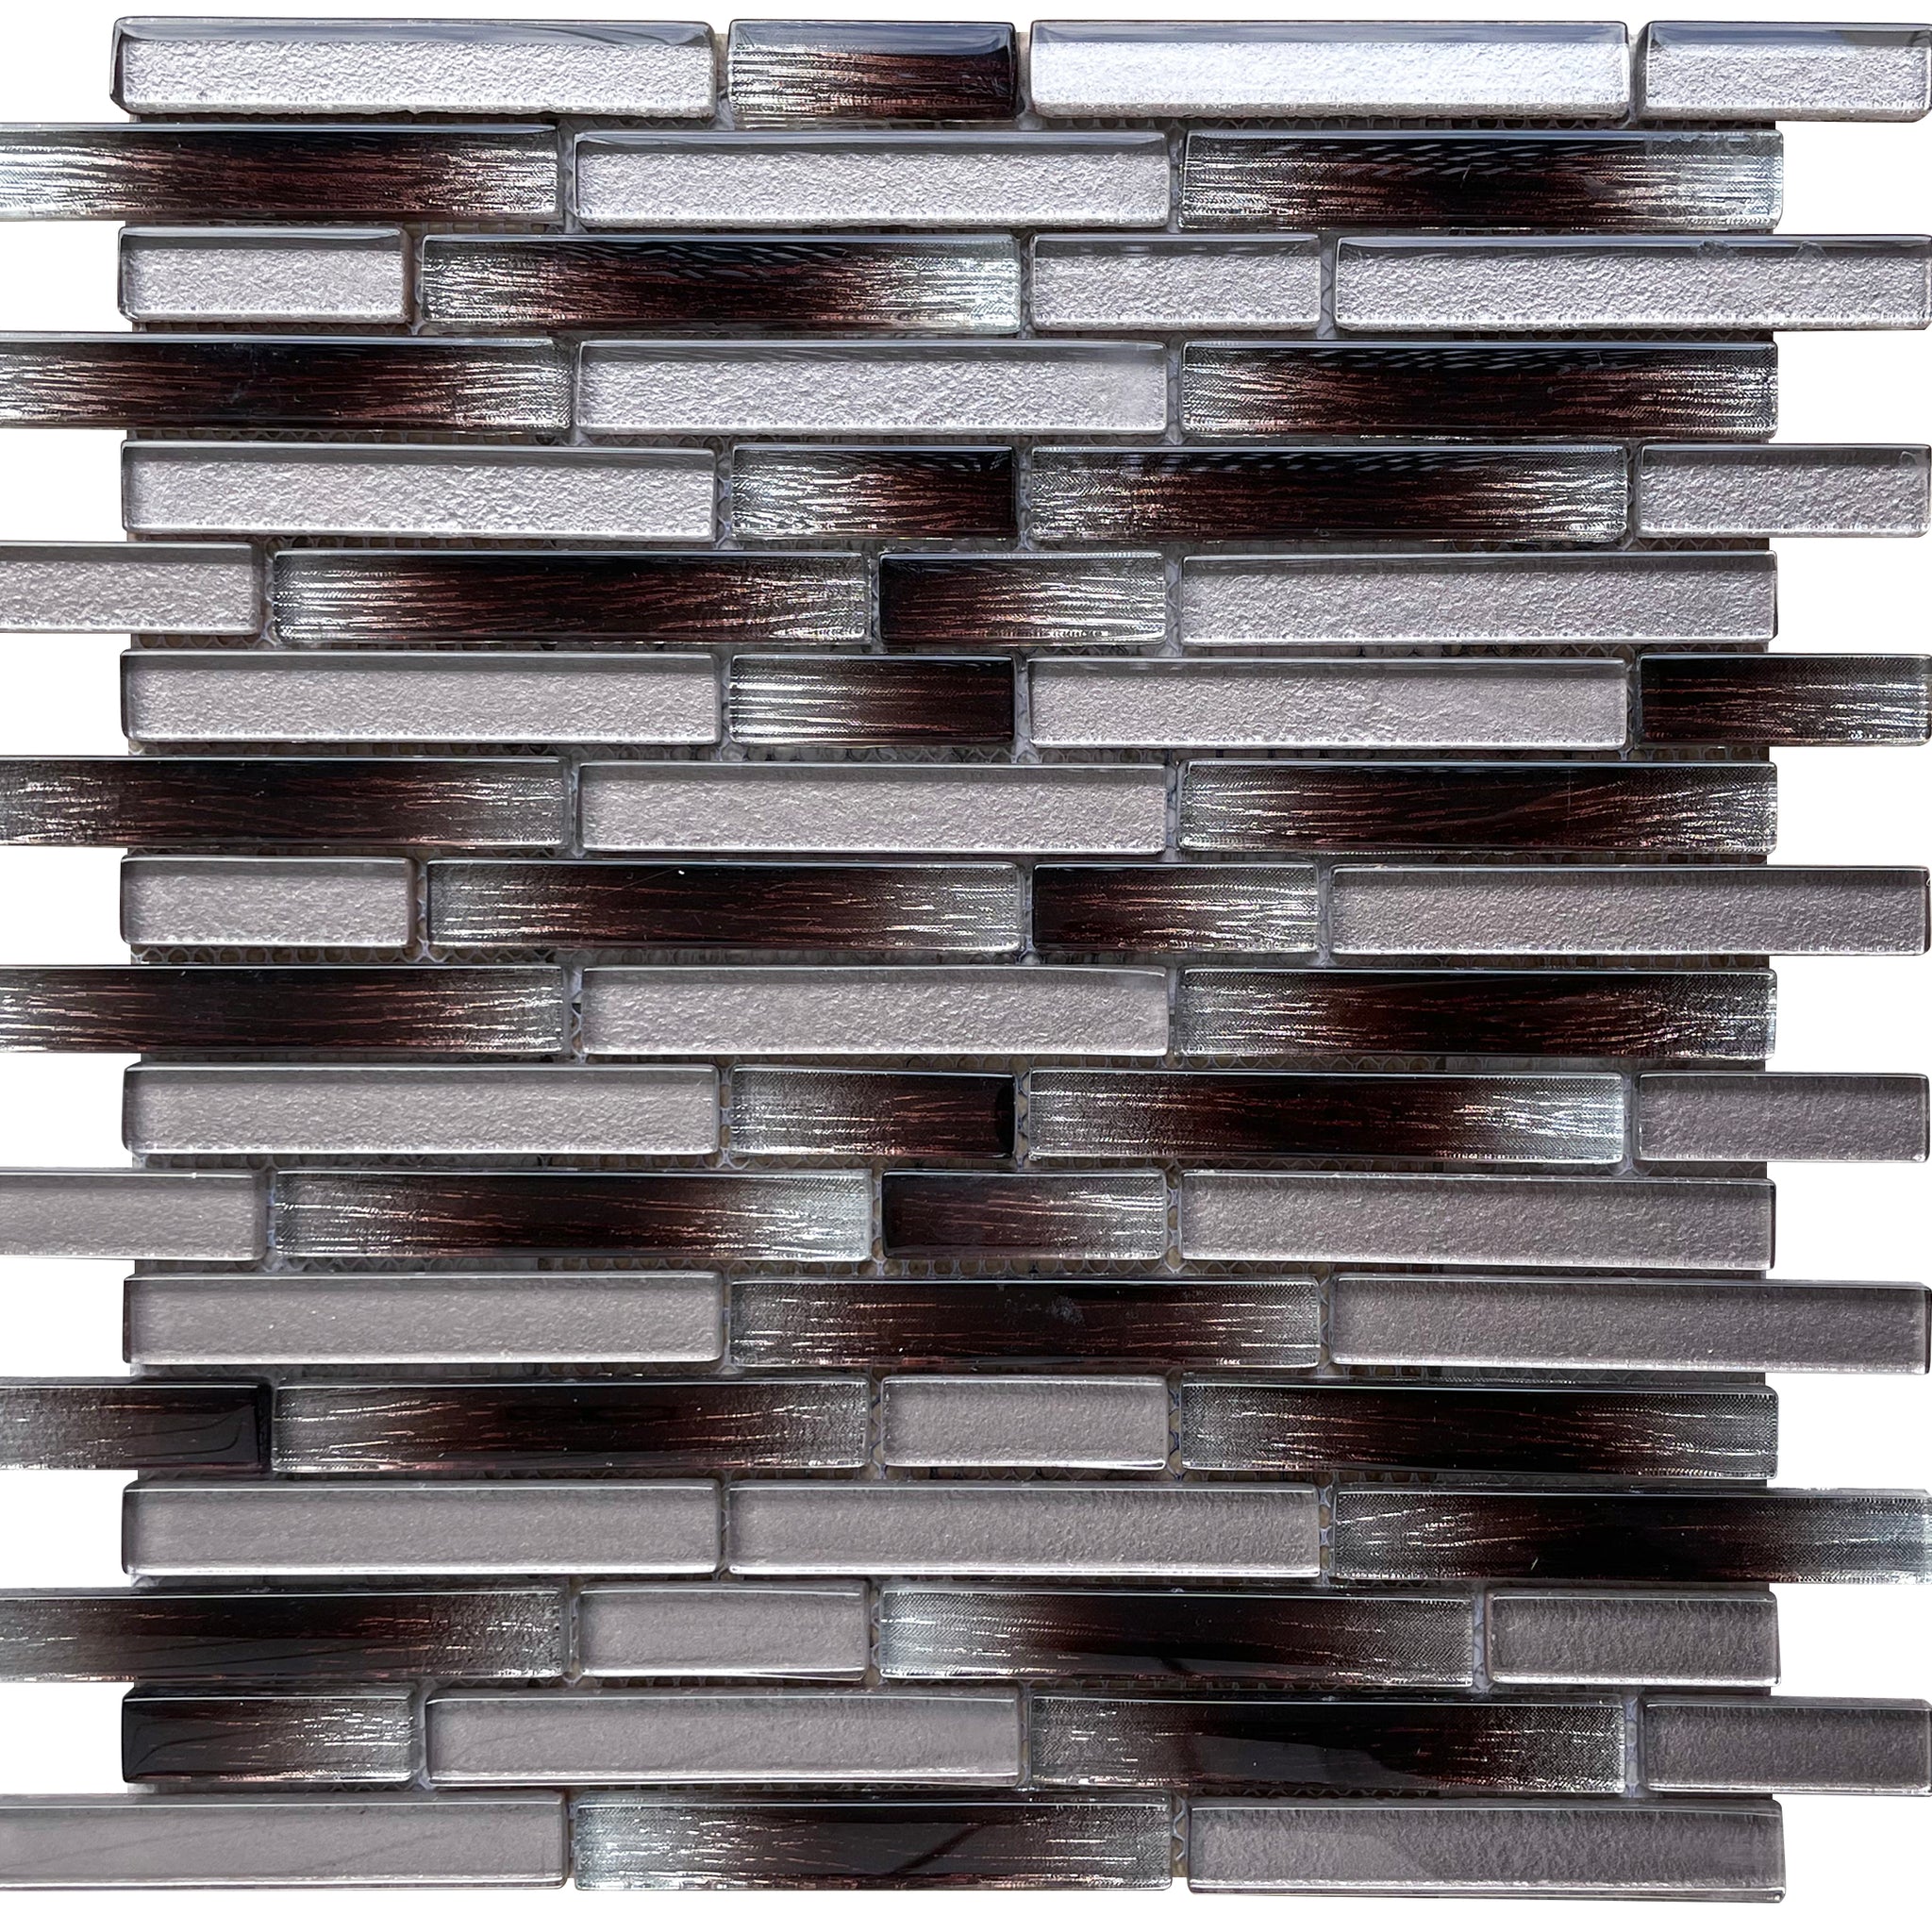 12 x 12 inch Glass Mosaic Tile with Chocolate Color and Glossy Finish